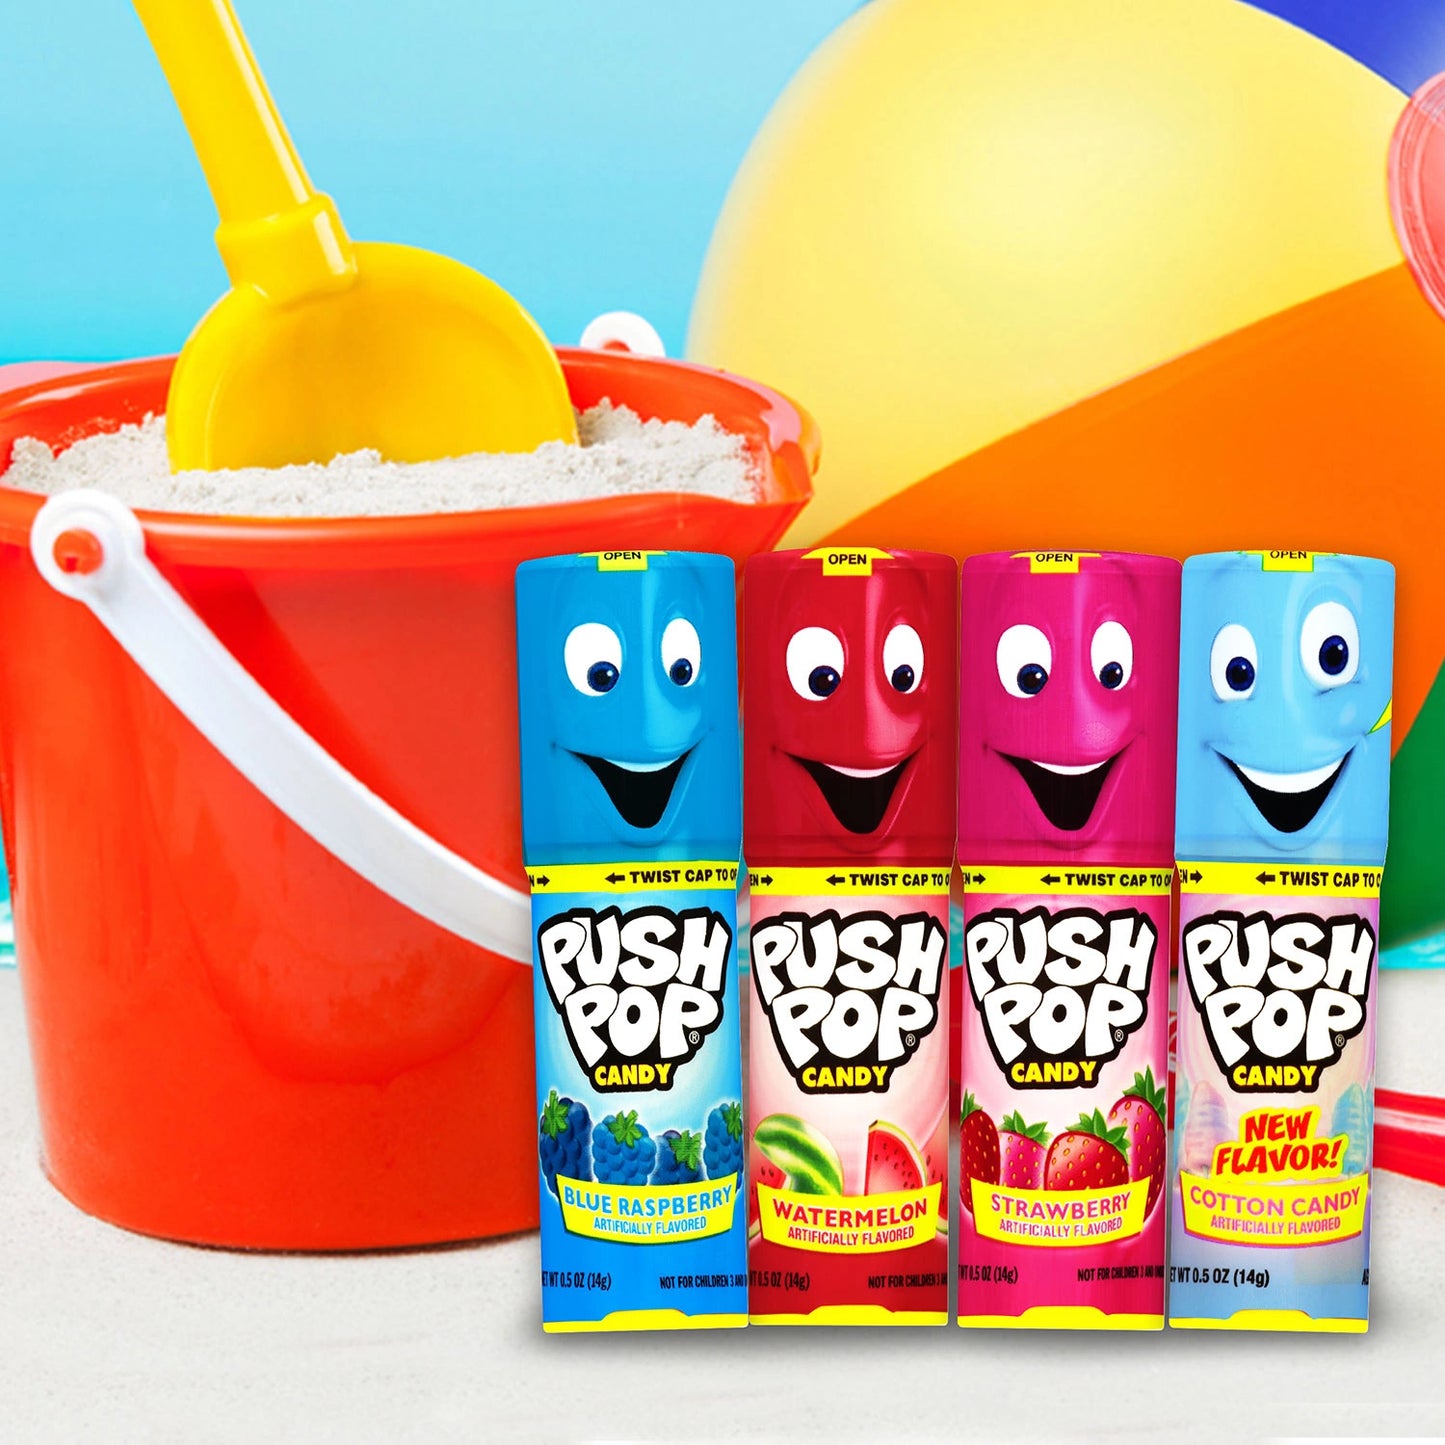 Push Pop Candy Mix, Blue Raspberry, Watermelon, Strawberry, Cotton Candy and Mystery Flavors (24 pk.) Wholesale